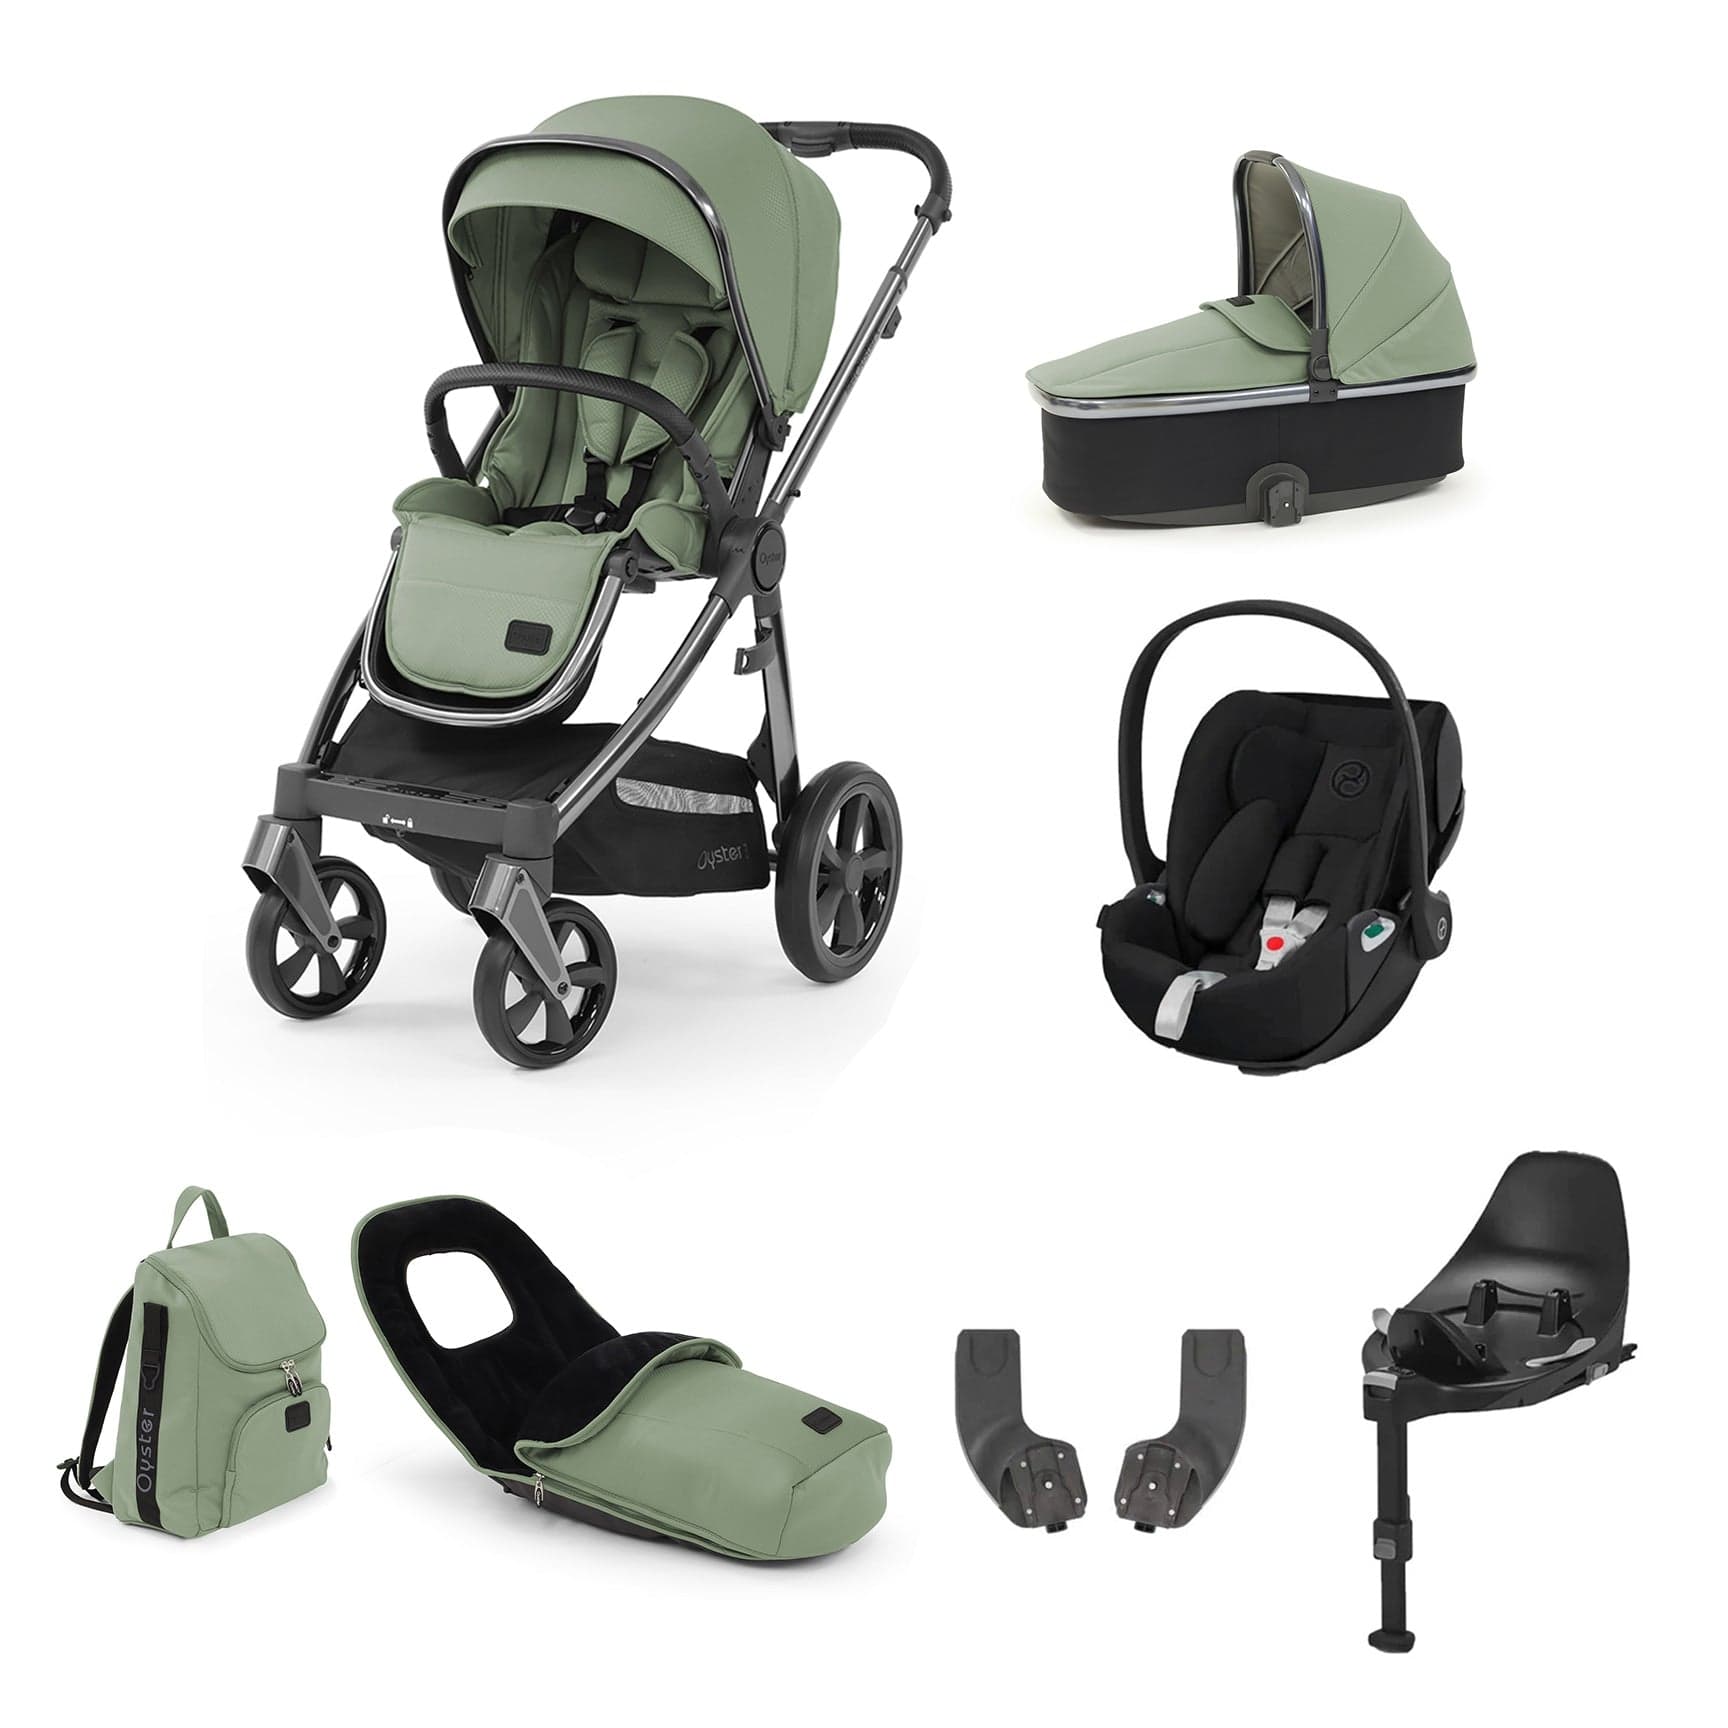 BabyStyle travel systems Babystyle Oyster 3 Luxury 7 Piece with Car Seat Bundle in Spearmint